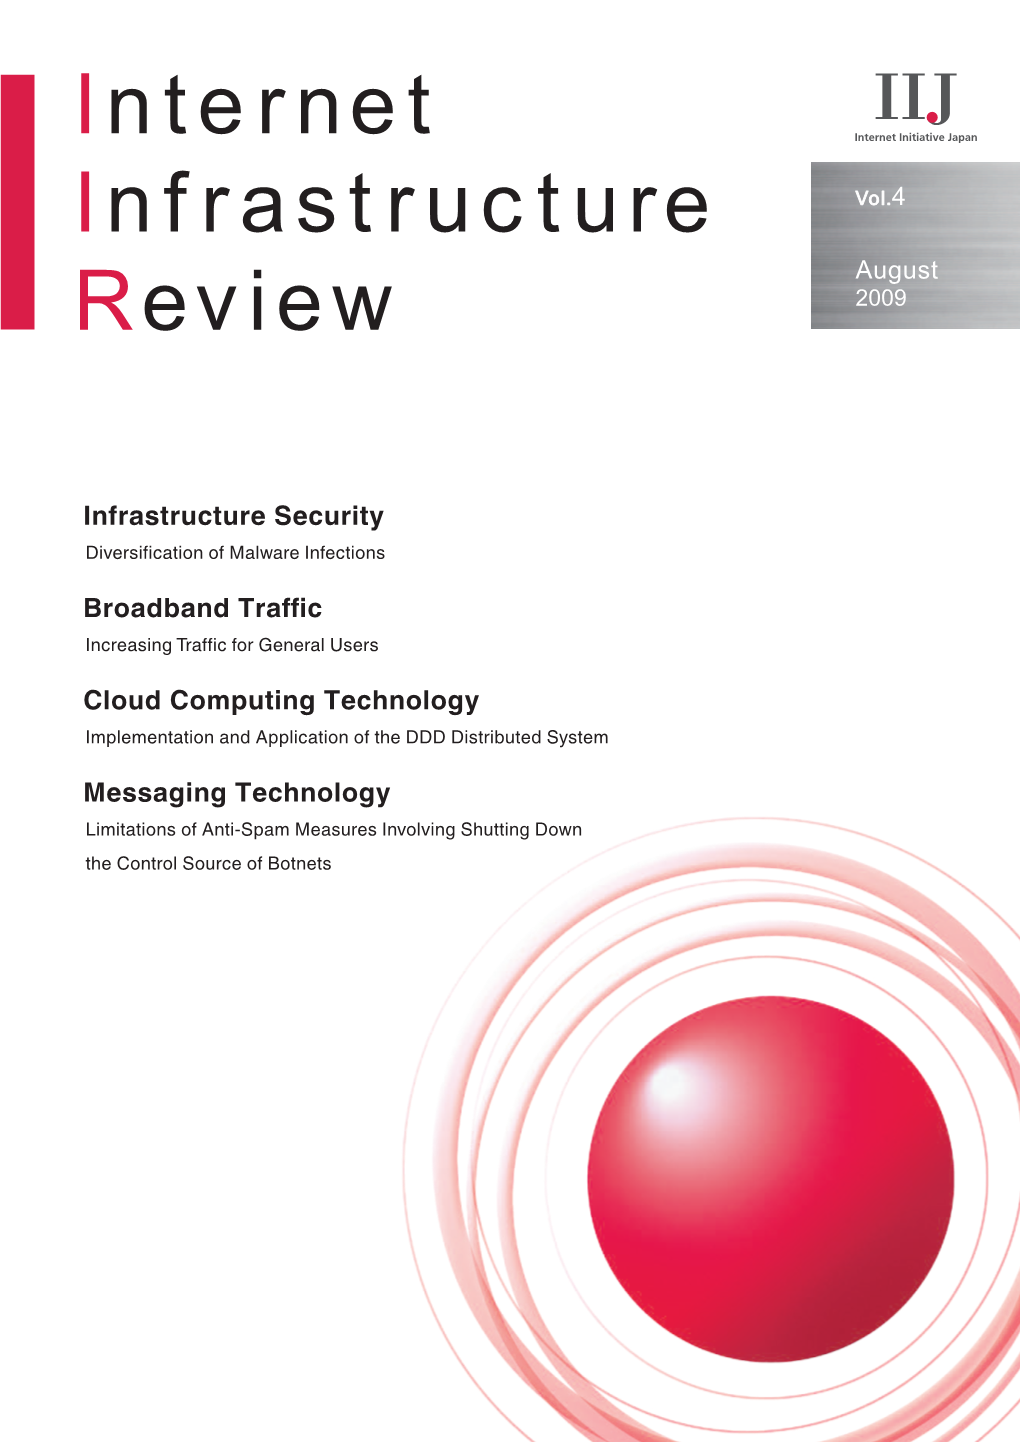 Internet Infrastructure Review Vol.4